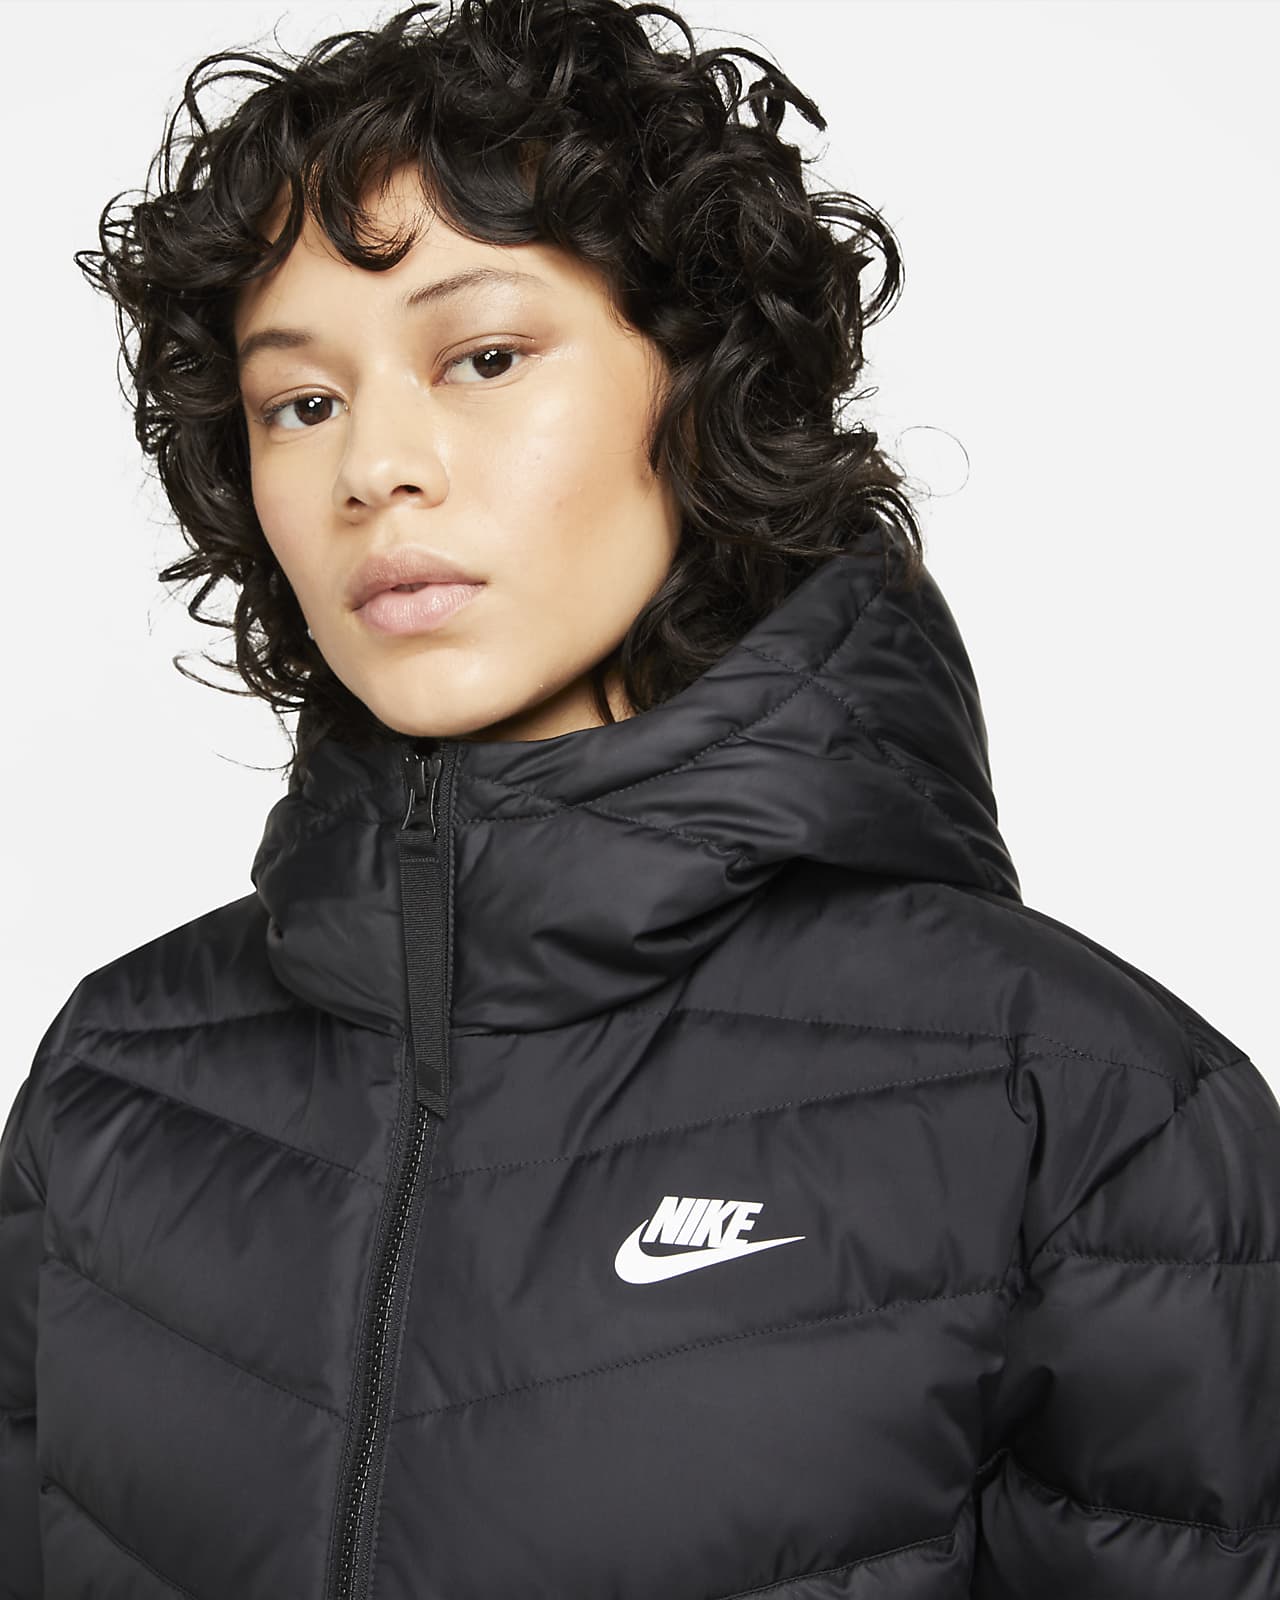 whale enthusiasm Related Nike Sportswear Therma-FIT Repel Windrunner Women's Hooded Parka. Nike.com